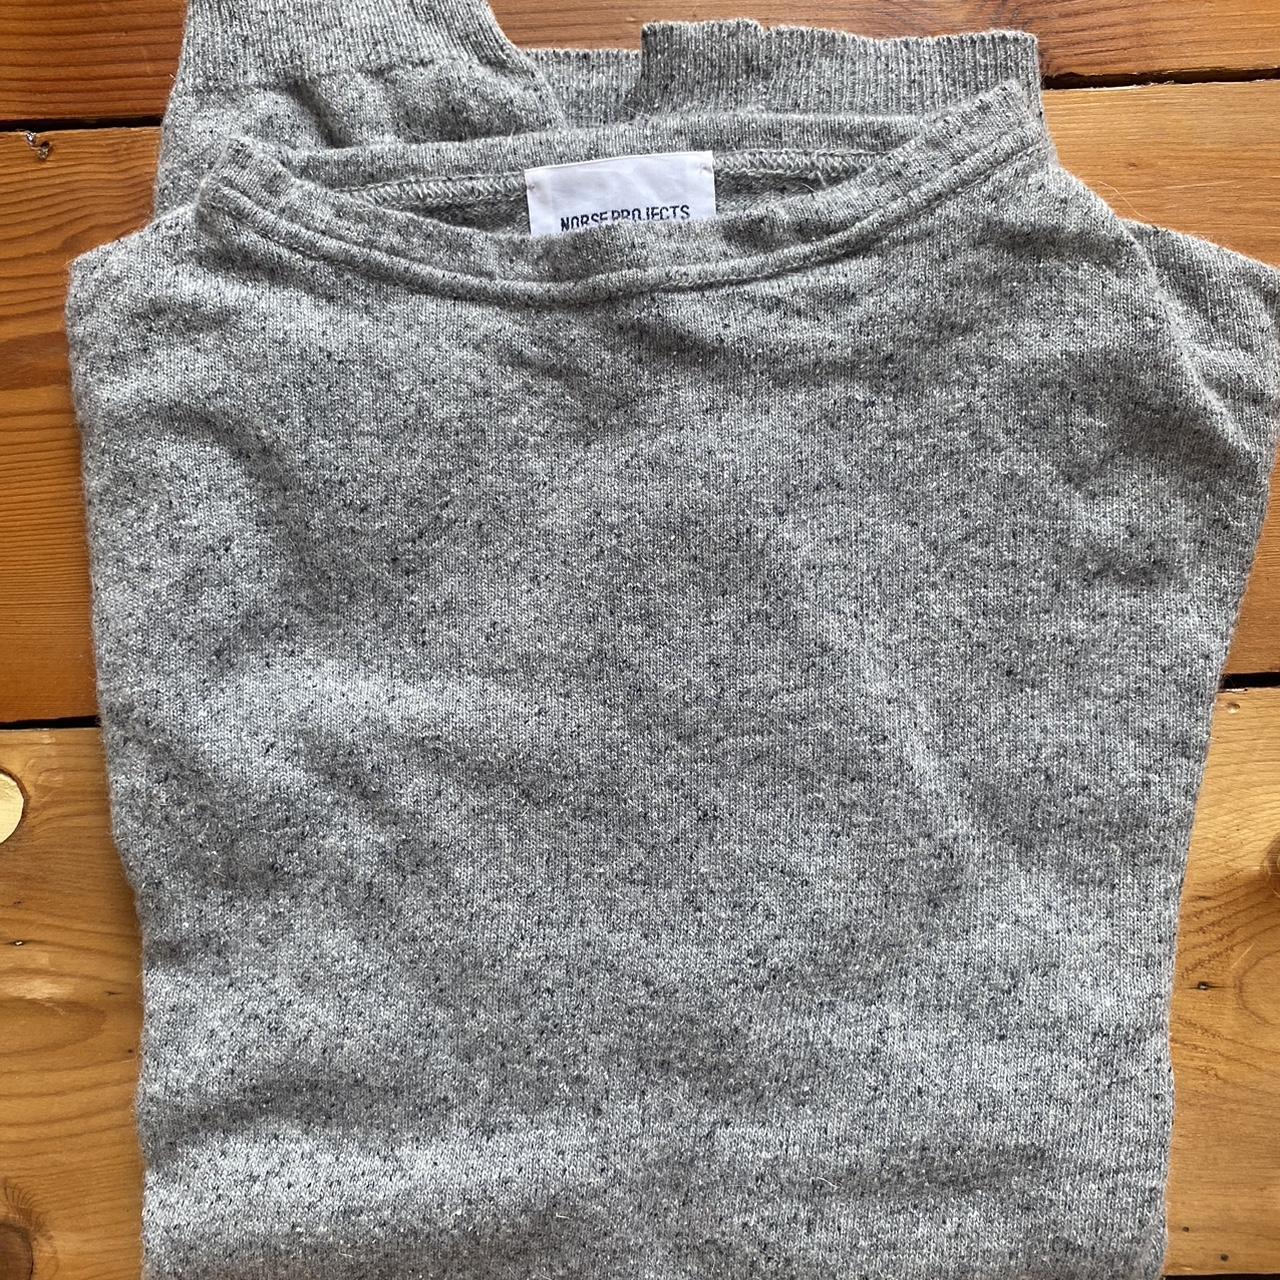 Norse Projects Grey Jumper Very lightweight and... - Depop